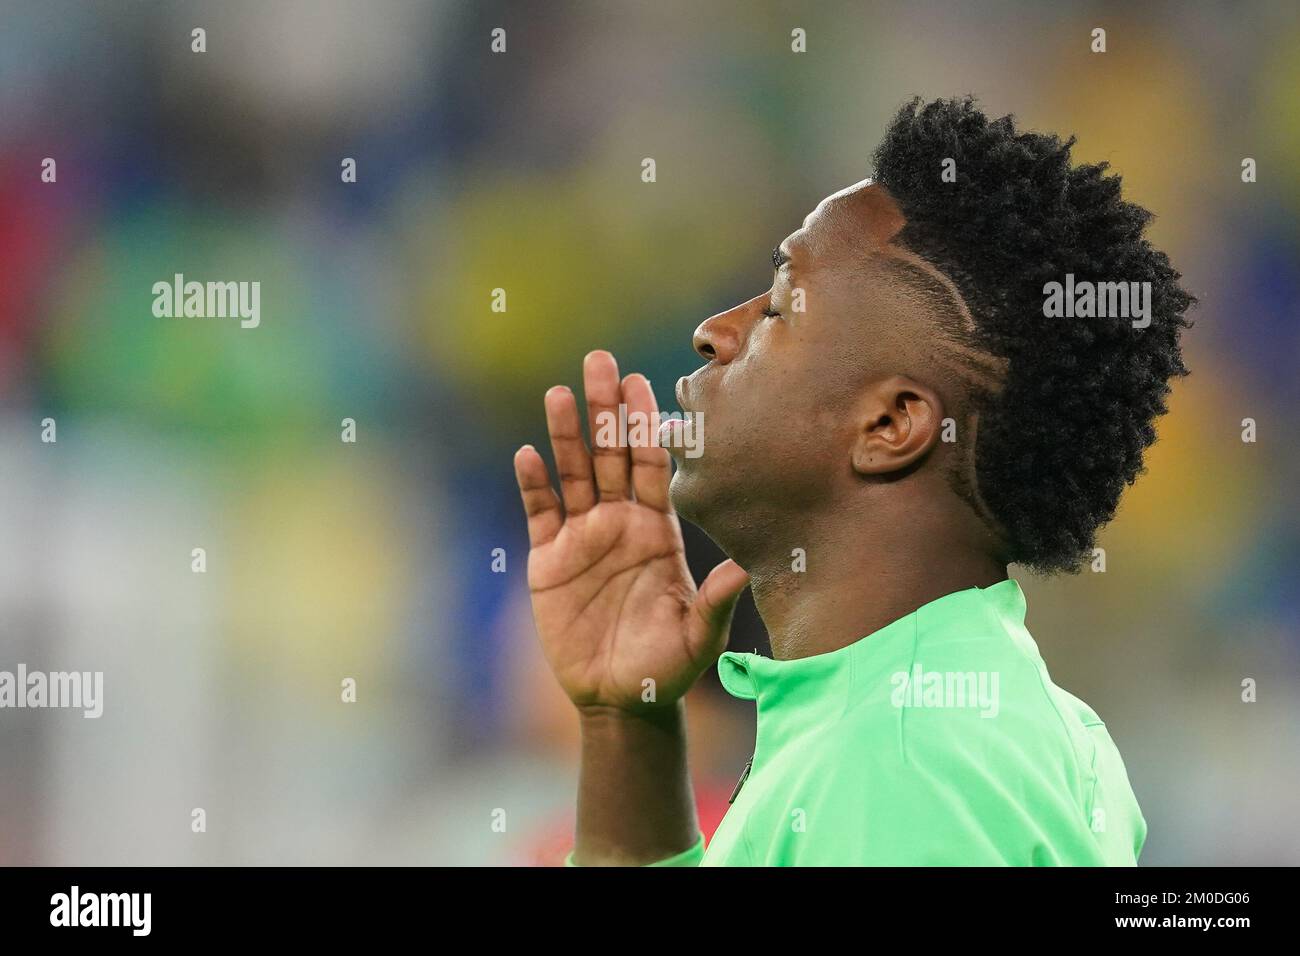 DOHA, QATAR - DECEMBER 5: Player of Brazil Vinícius Júnior prays before the FIFA World Cup Qatar 2022 Round of 16 match between Brazil and South Korea at Stadium 974 on December 5, 2022 in Doha, Qatar. (Photo by Florencia Tan Jun/PxImages) Stock Photo